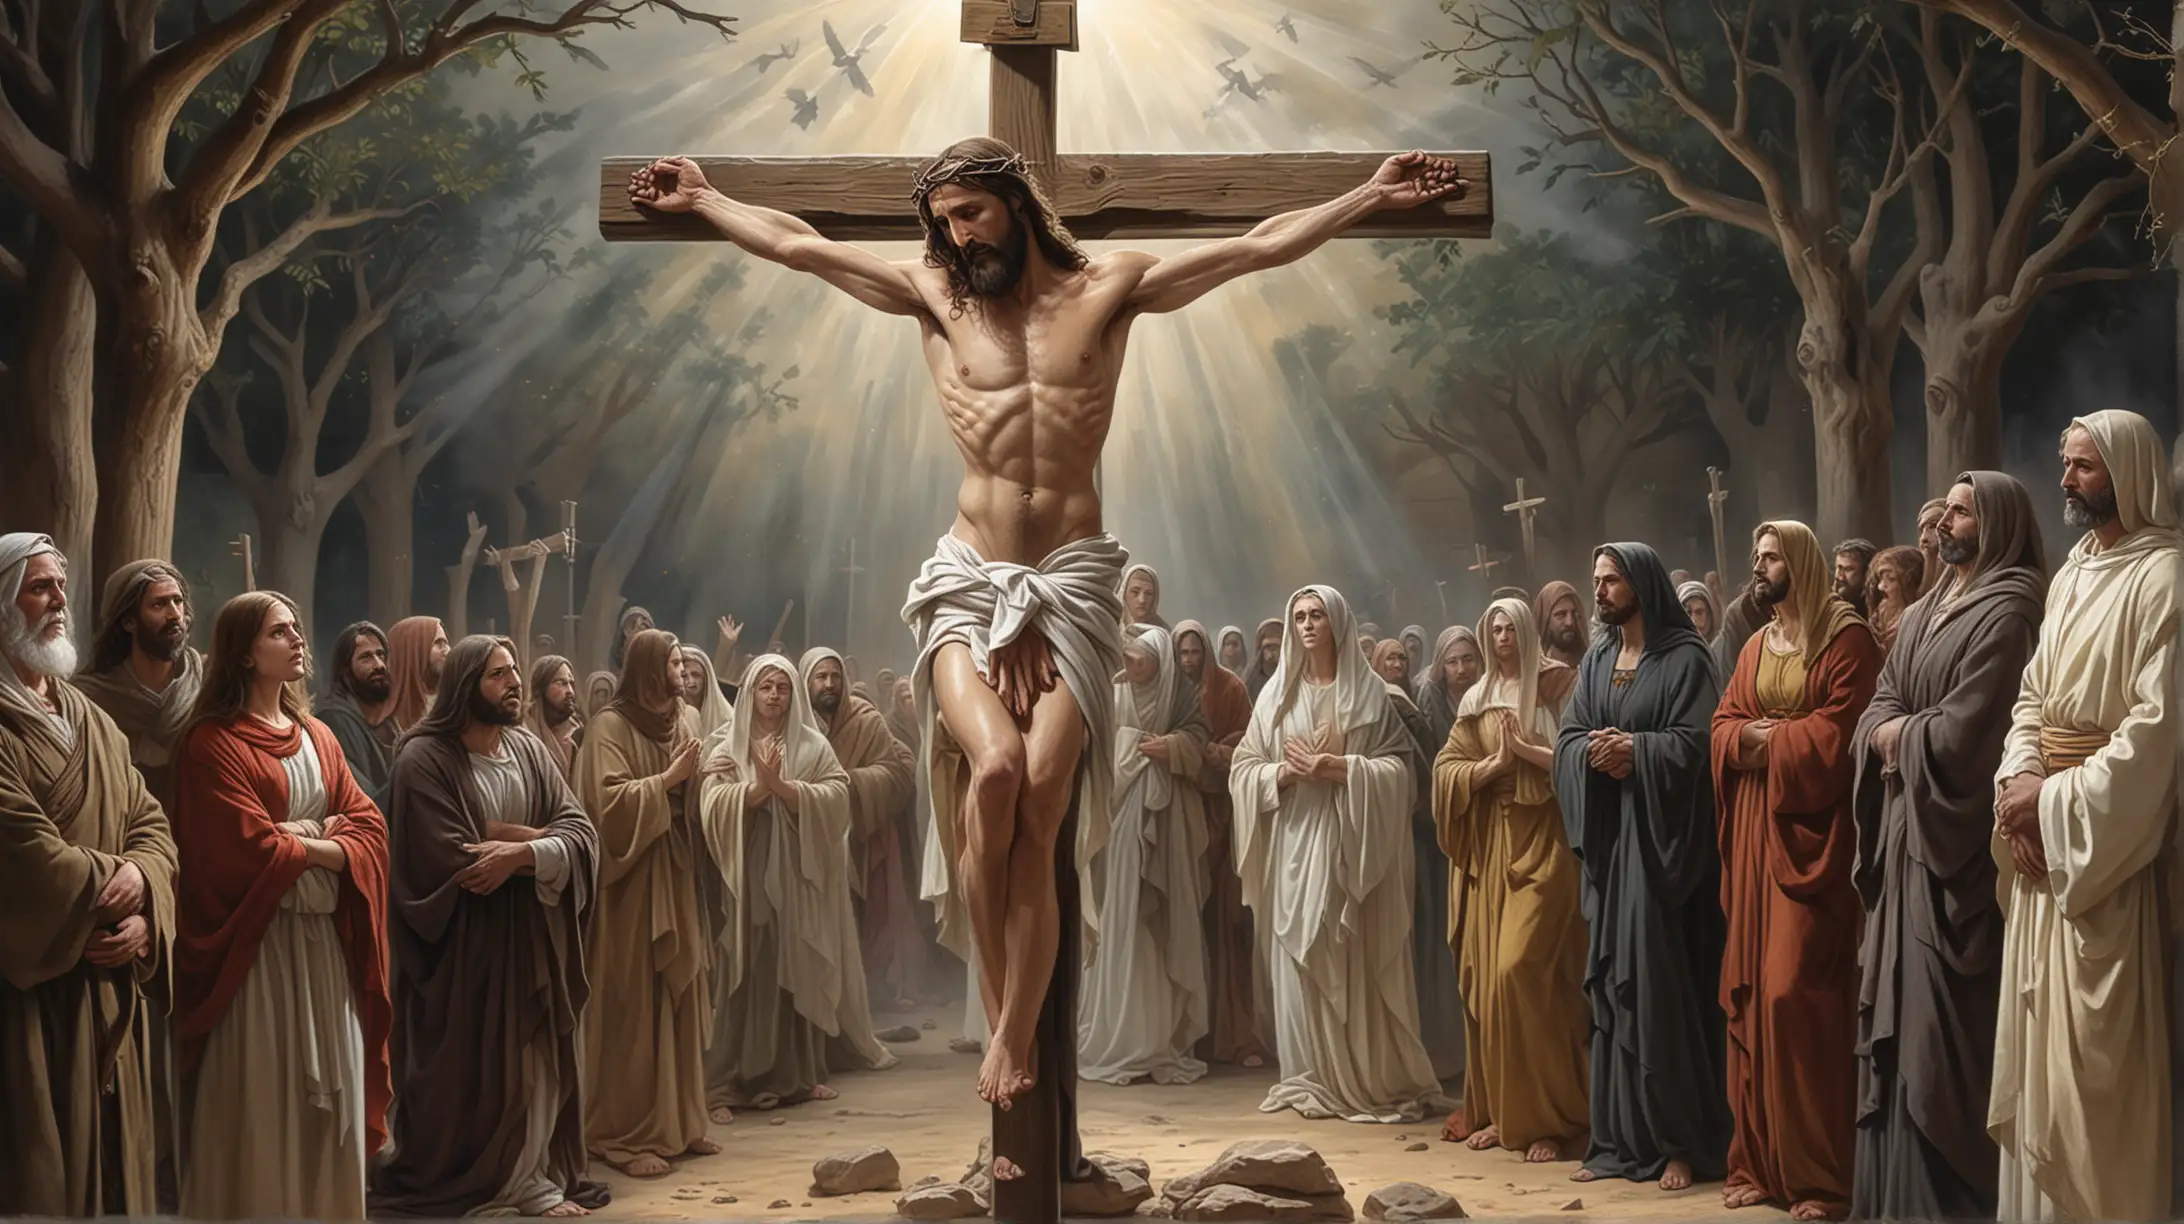 A poignant illustration capturing the moment of Jesus' crucifixion, with Mary Magdalene, Mary, and the mother of James and John depicted in the background, representing the diverse group of followers who remained faithful to Jesus even in his darkest hour.